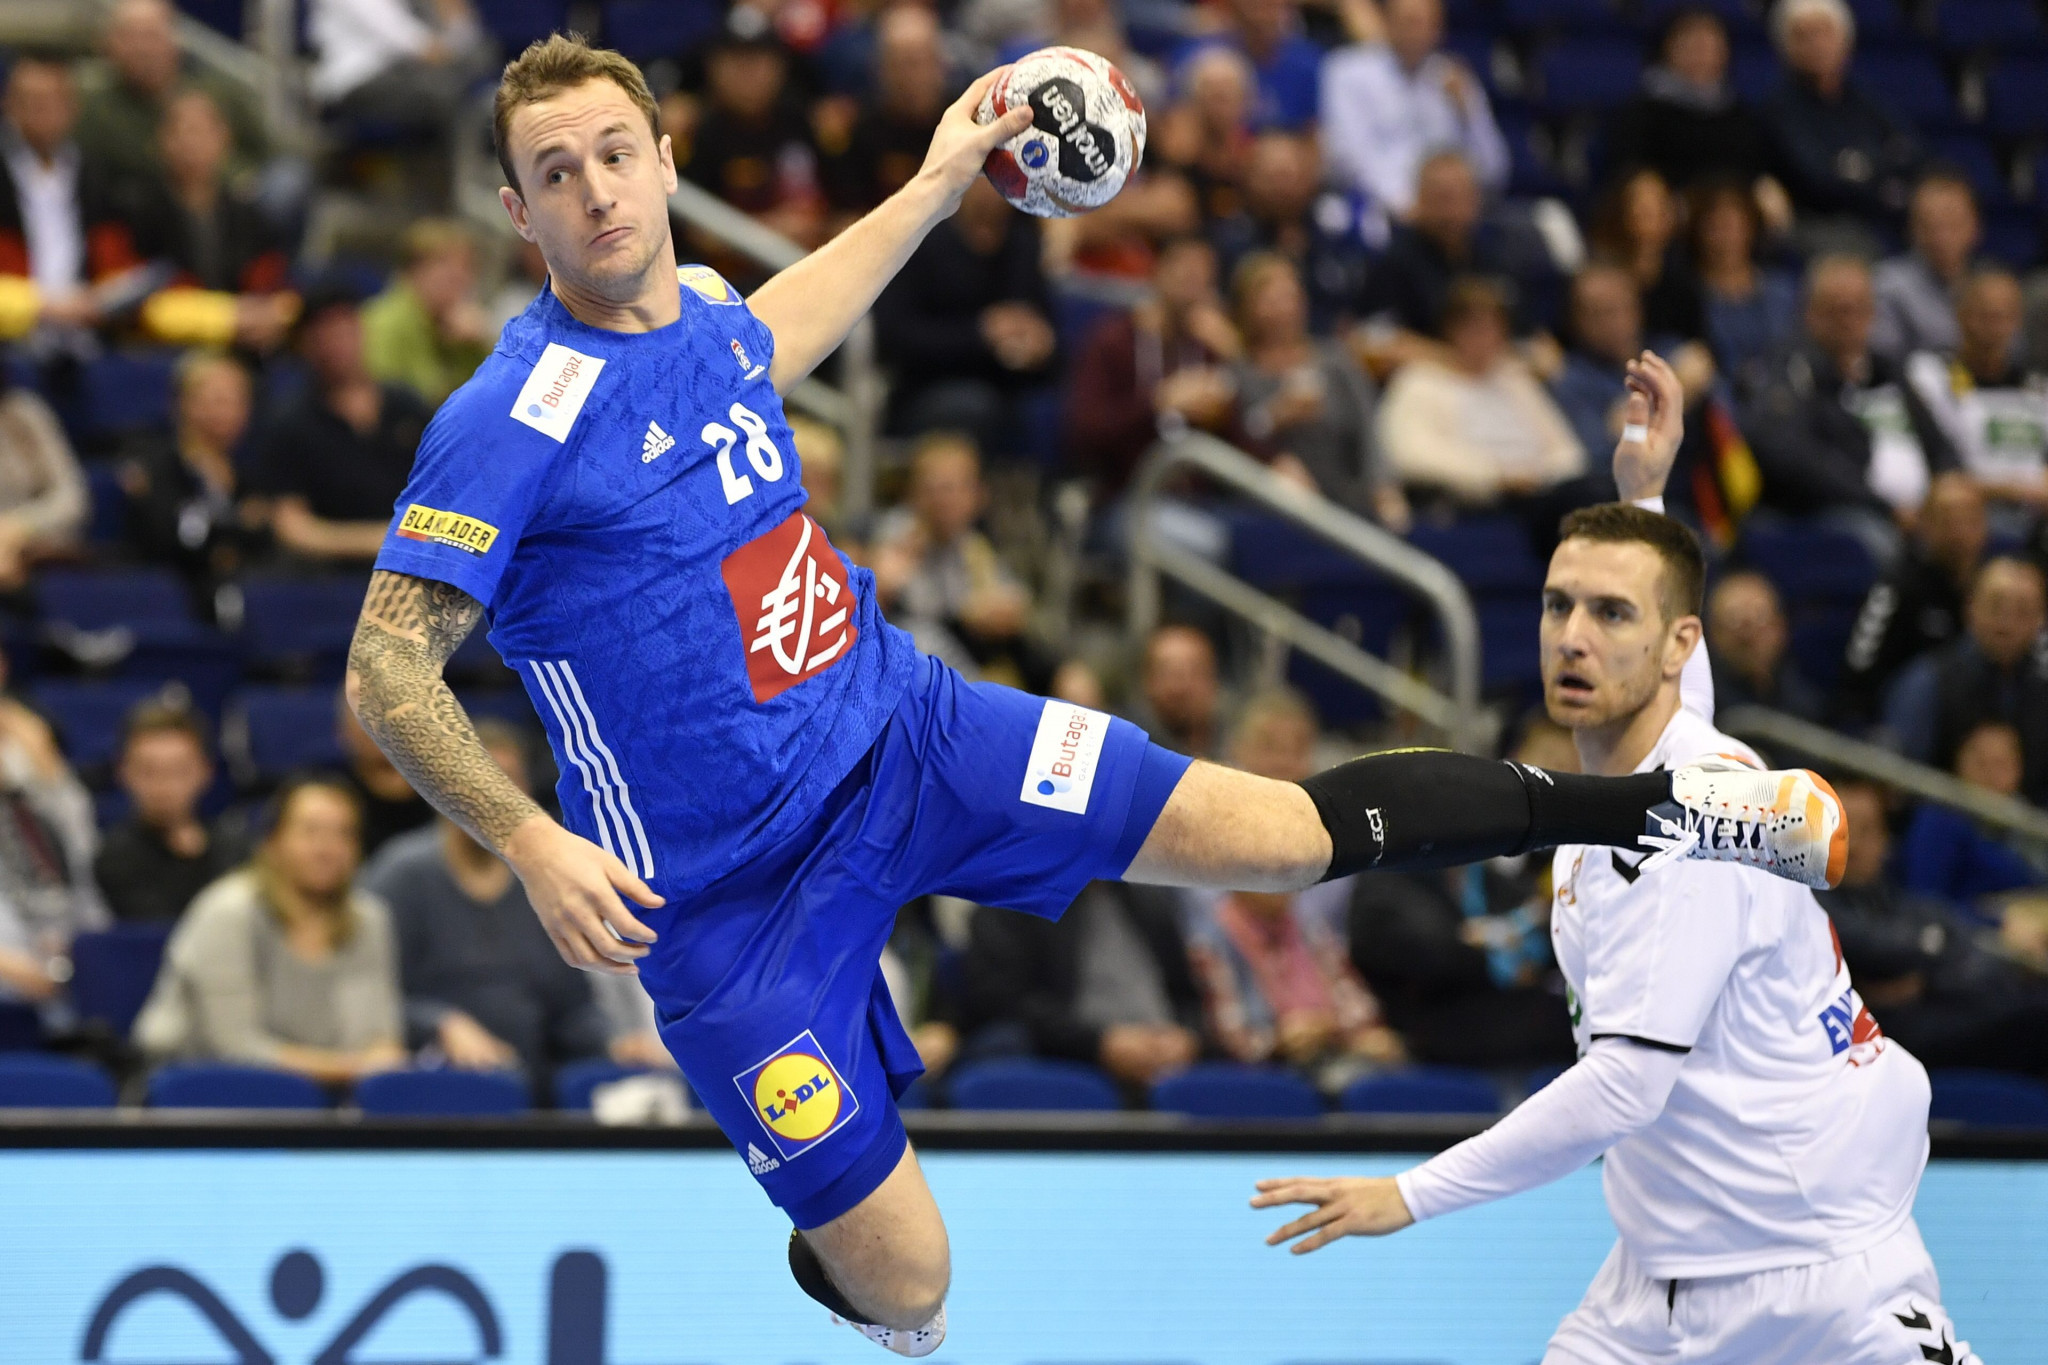 Defending champions France defeated Serbia 32-21 in the Group A clash at the IHF Men's Handball World Championship ©Getty Images